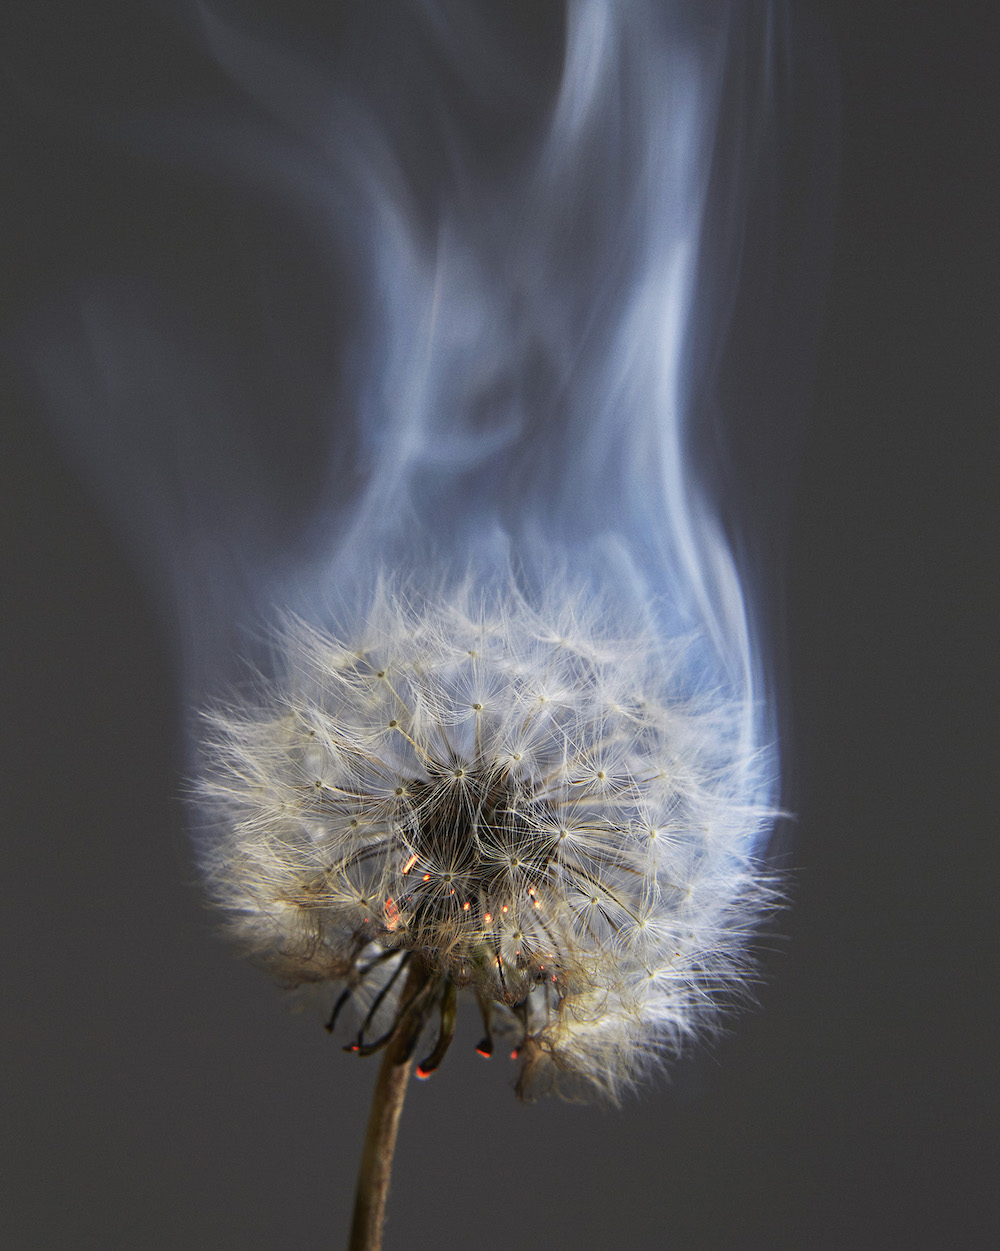 A smoking dandelion from the An Exploding World project. Image: Rankin